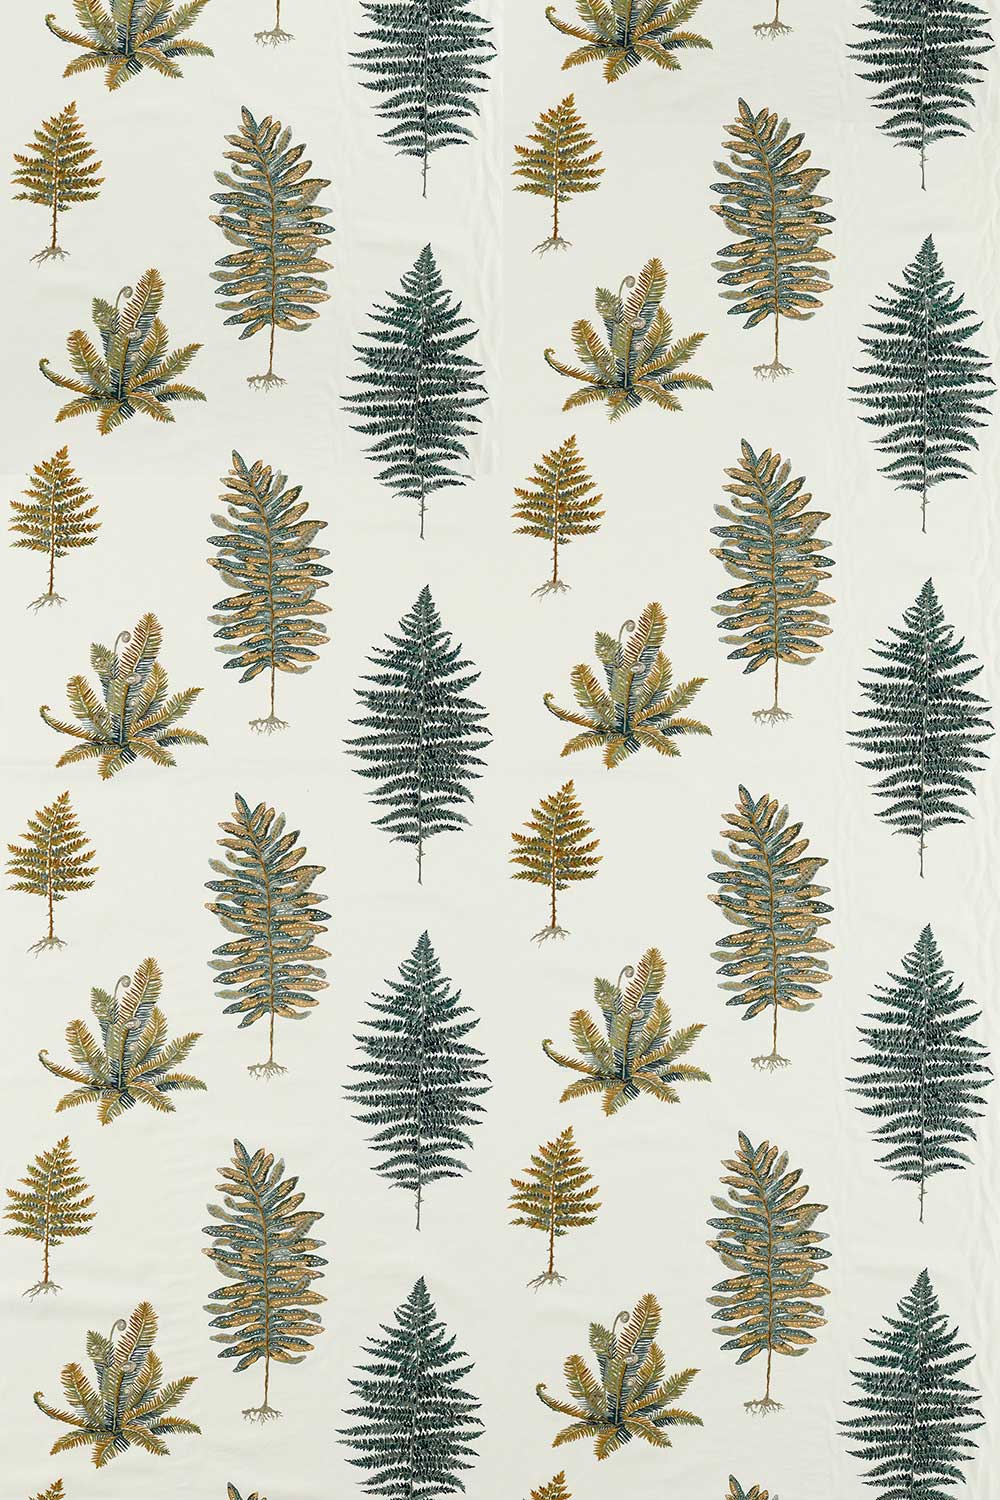 Fernery Fabric - Forest Green - by Sanderson